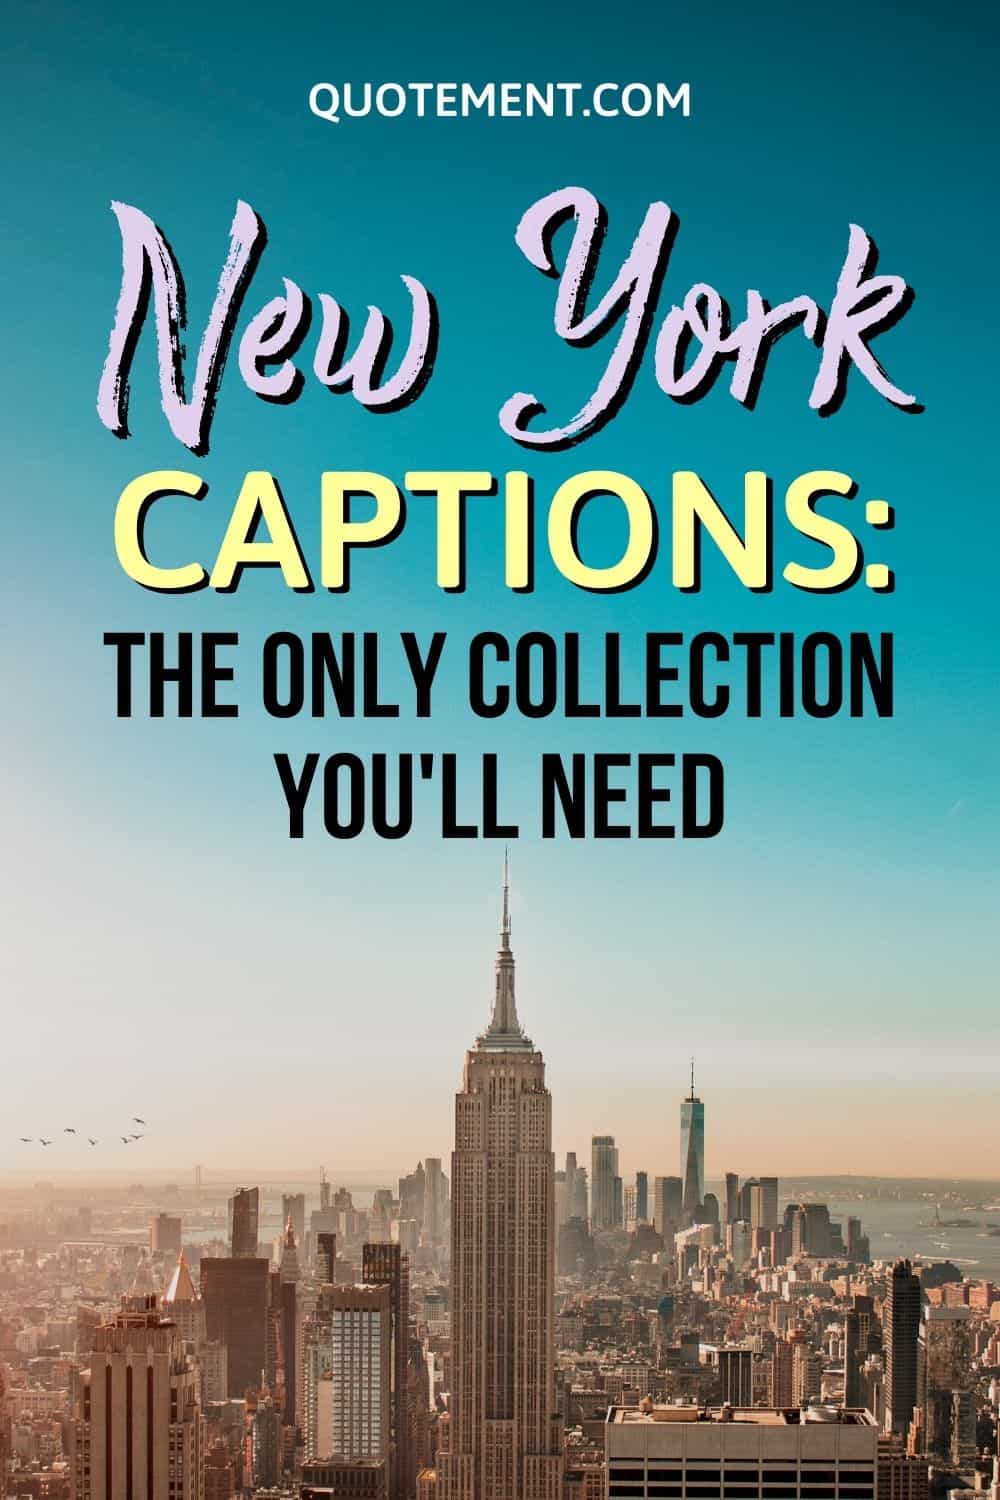 180 New York Captions A Fascinating Collection To Enjoy